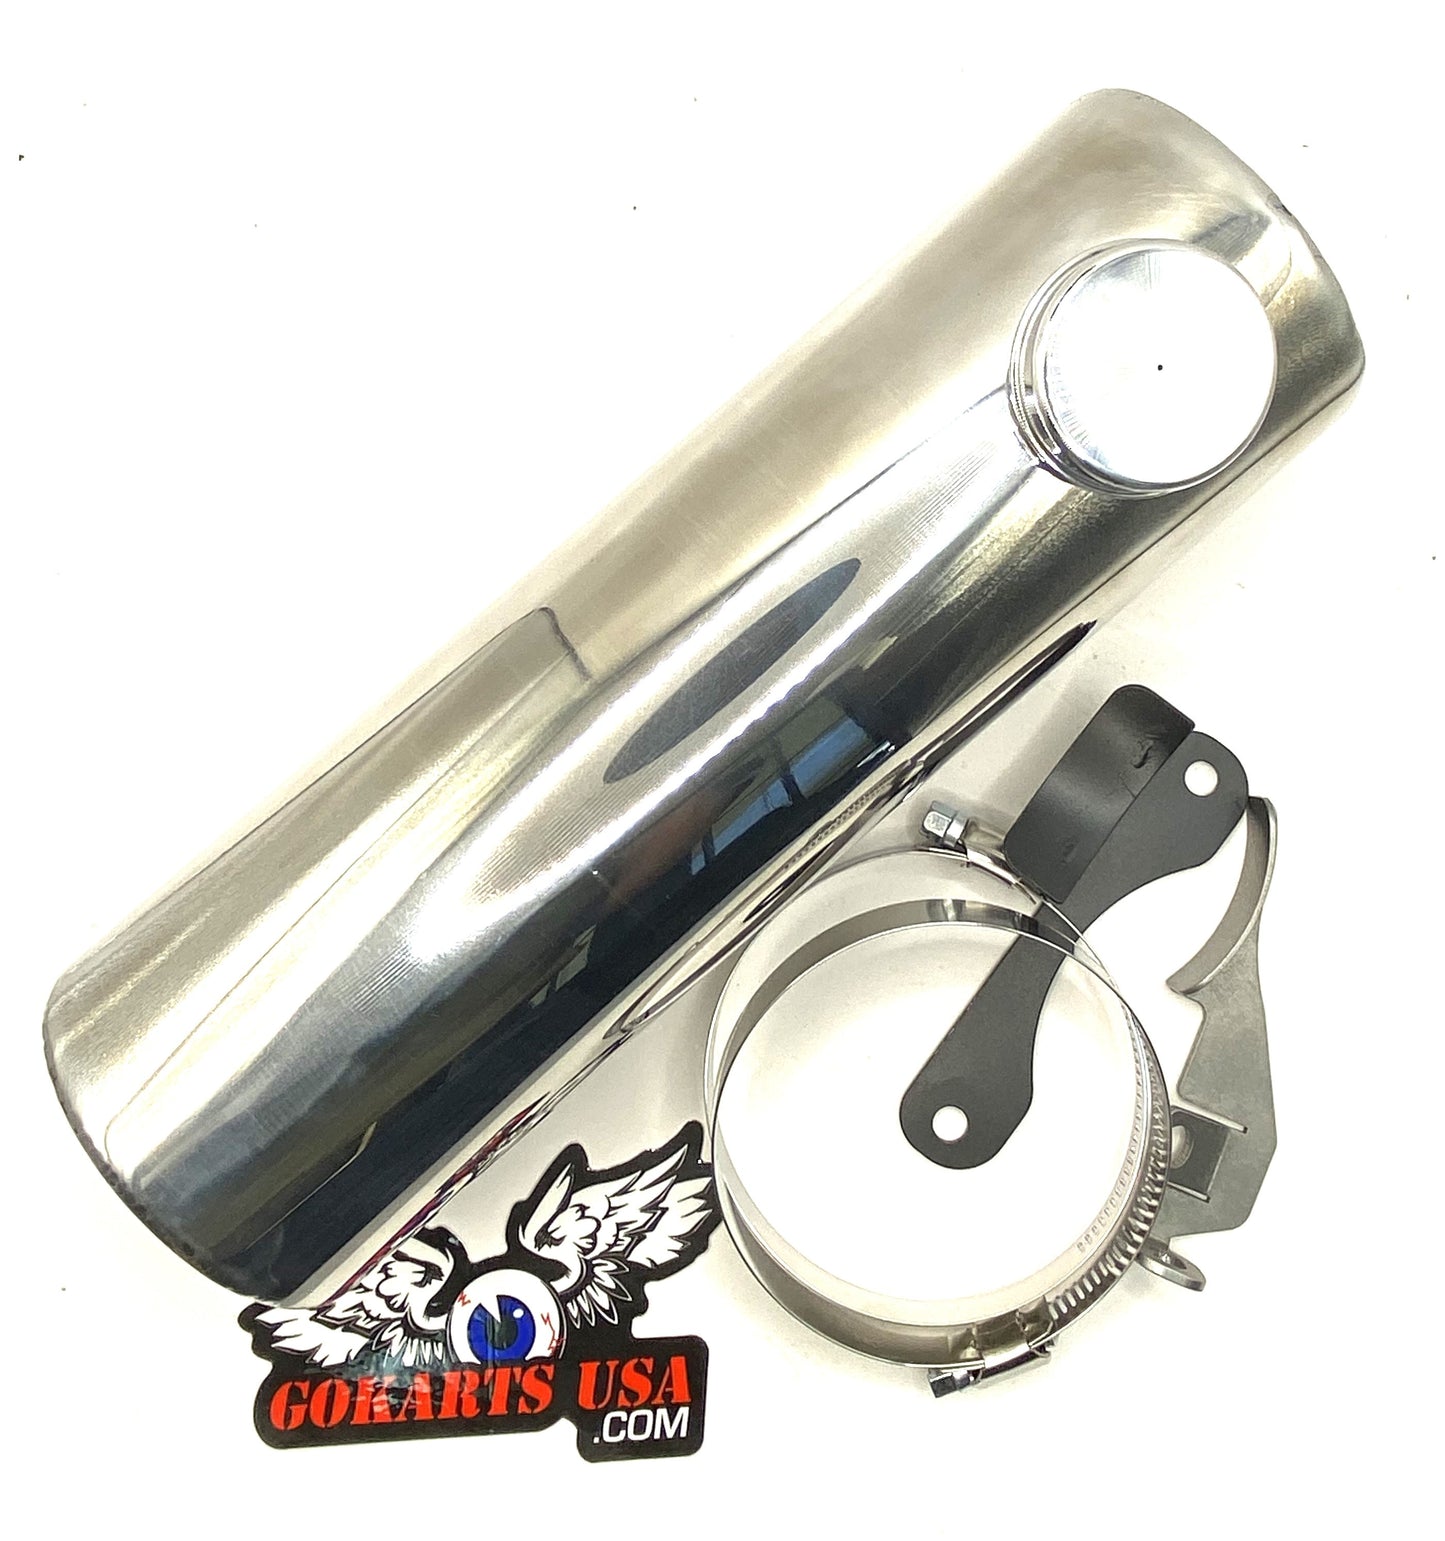 Mounting Kit, for 3.5" Cylindrical Minibike Gas Tank on Honda GX200